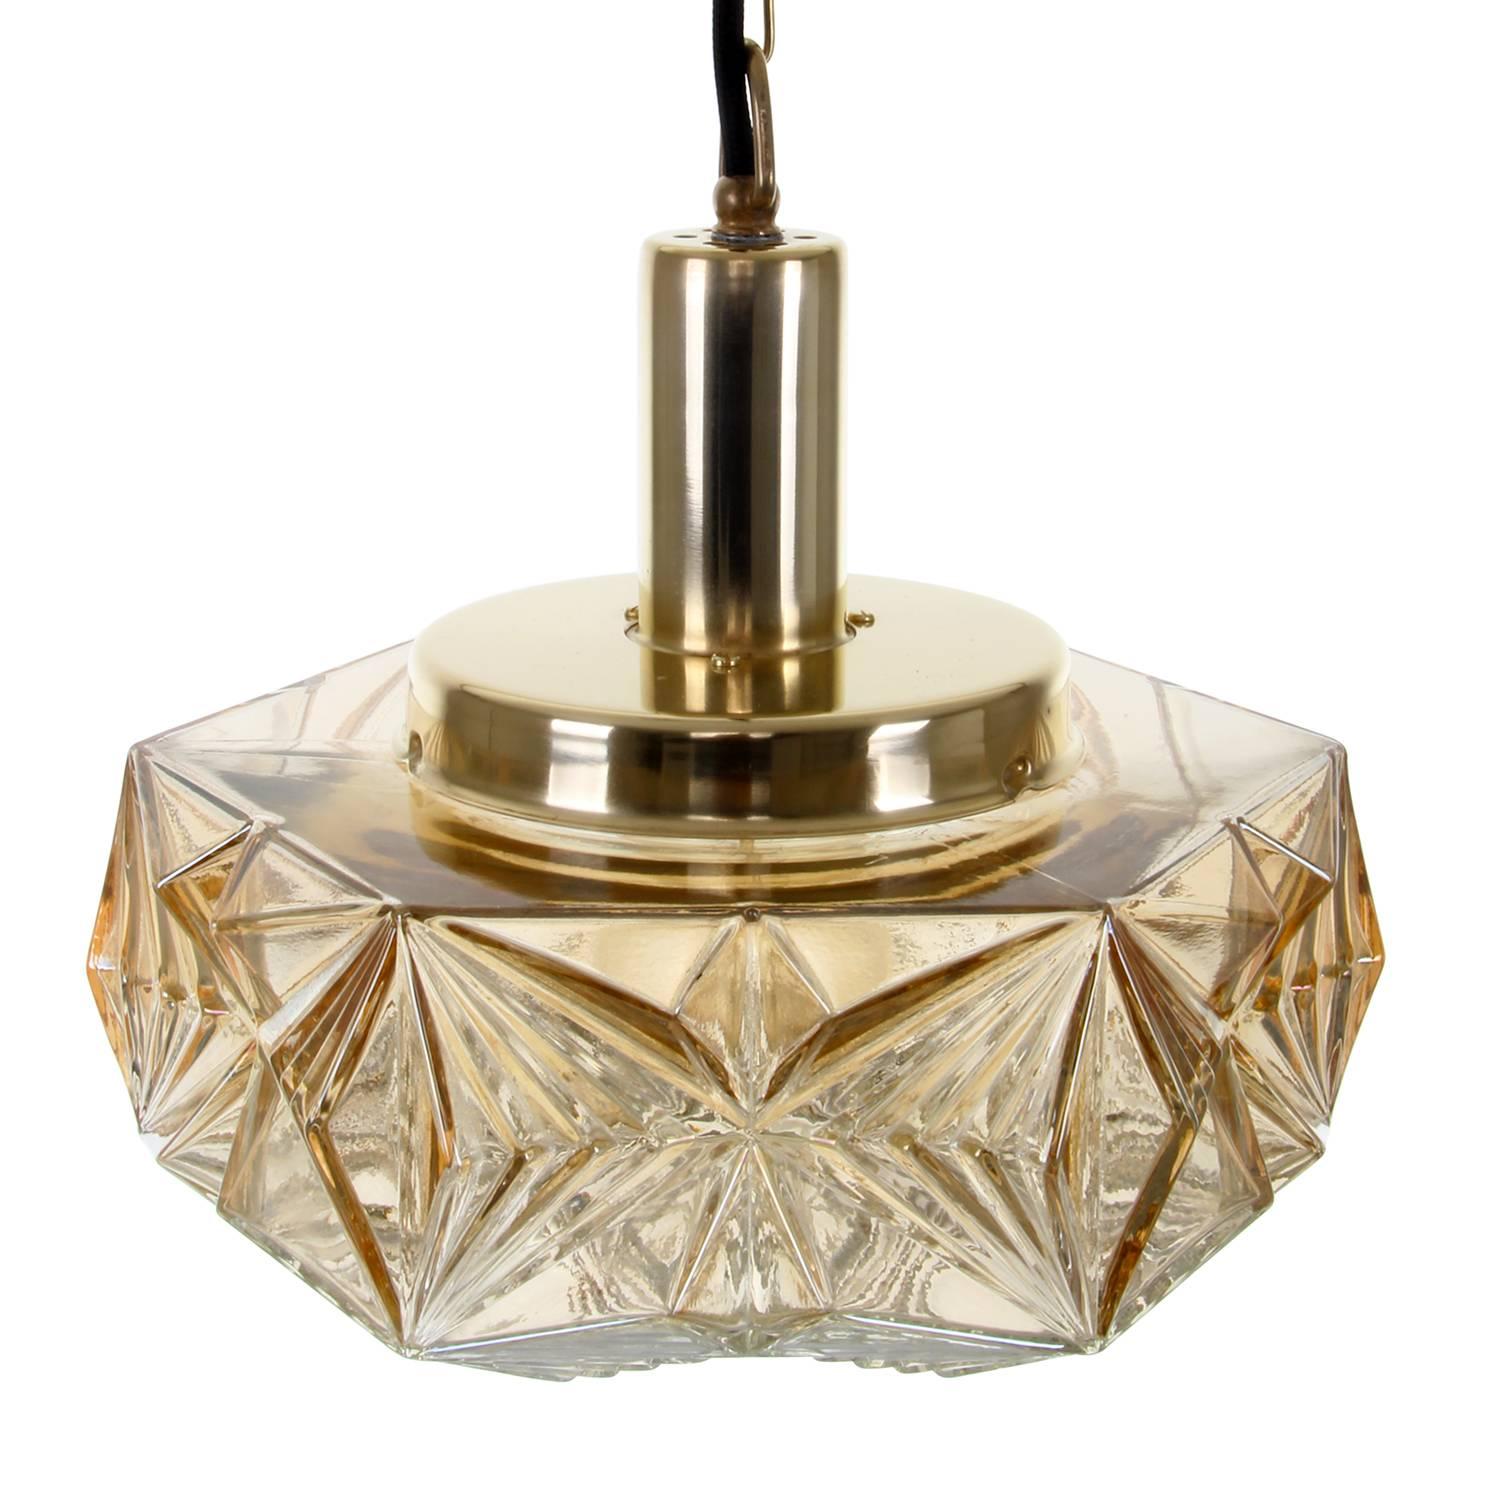 Polished Pressed Glass Pendant, No. 36404 by Vitrika, 1960s, Vintage Glass and Brass Lamp